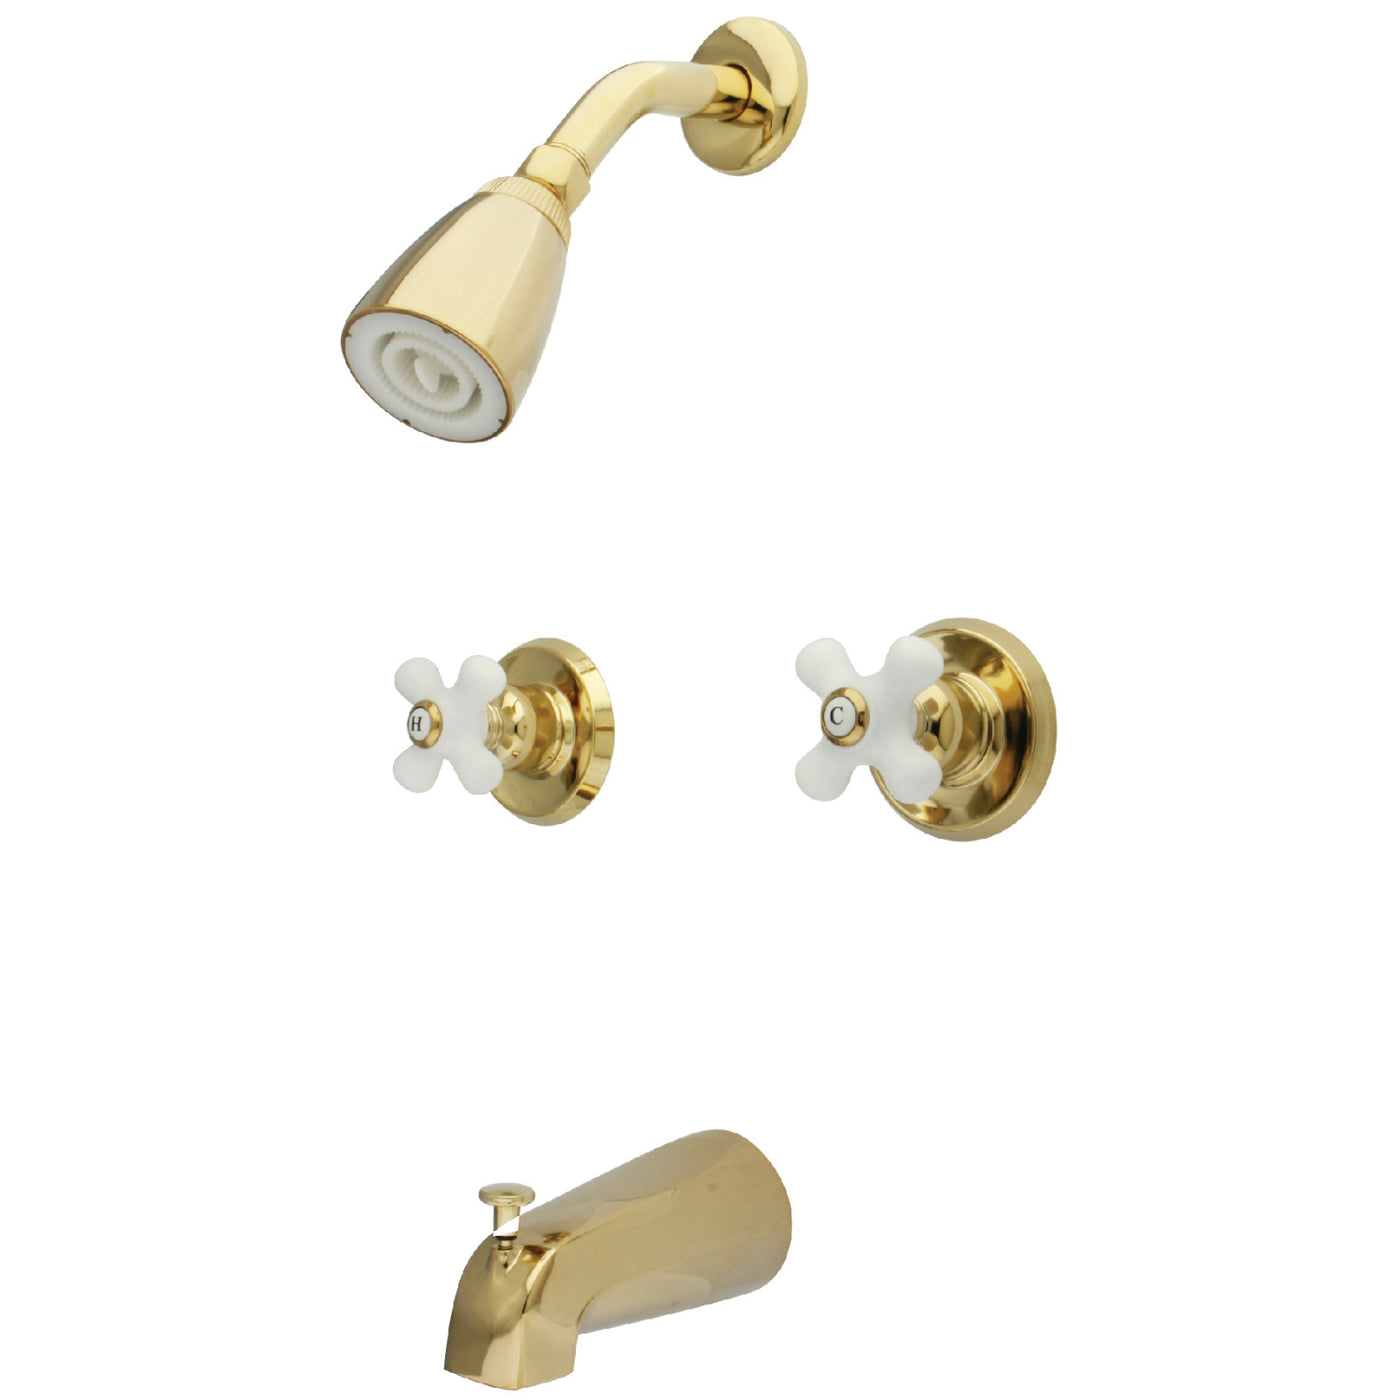 Elements of Design EB242PX Tub and Shower Faucet, Polished Brass